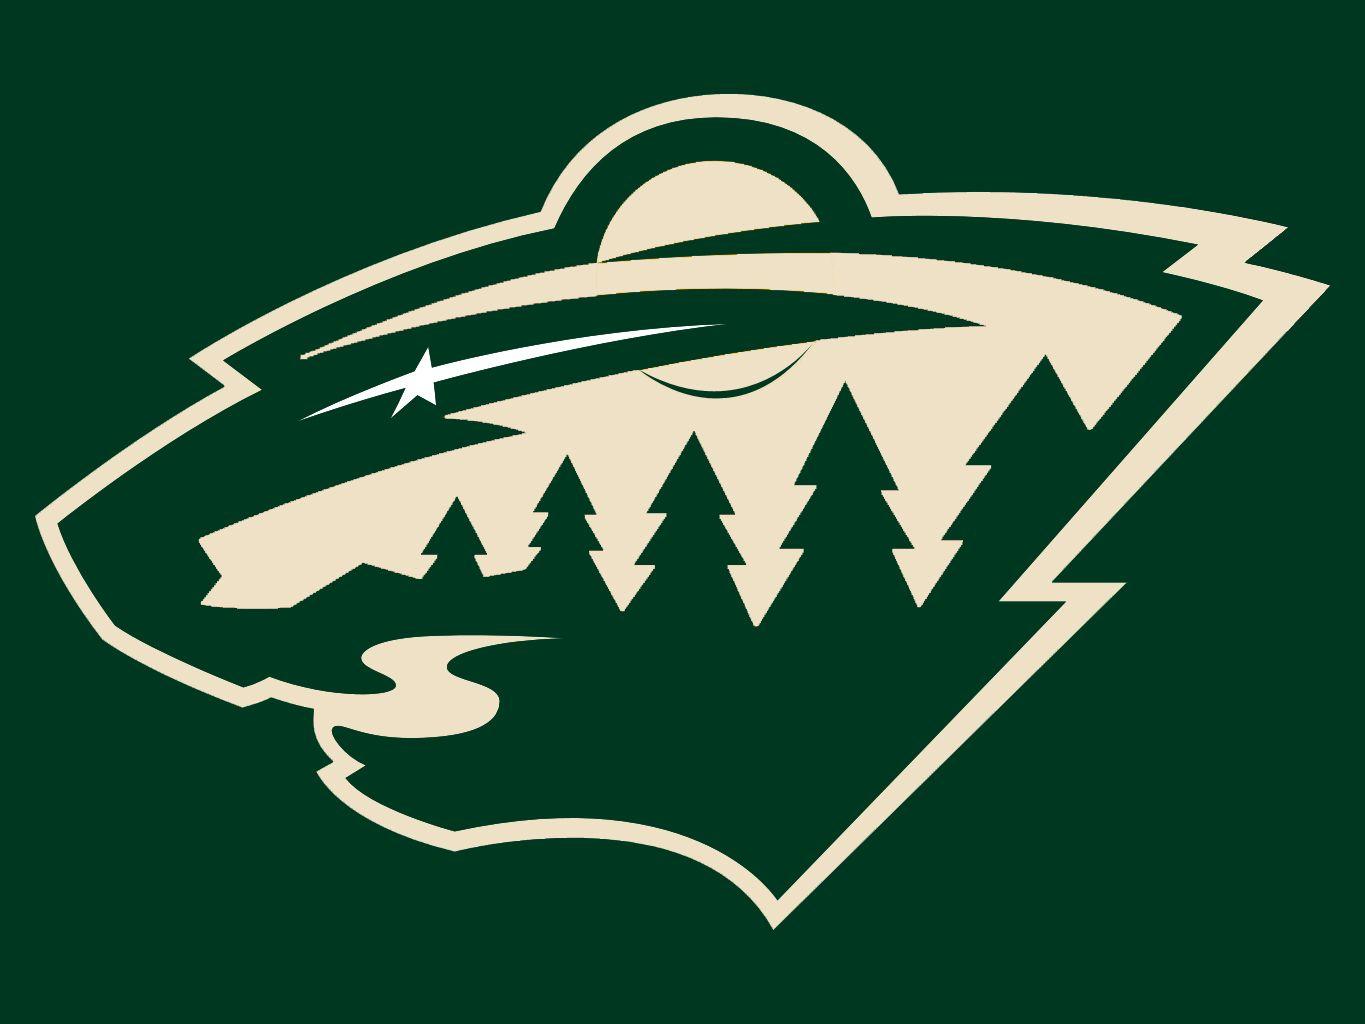 Wild Logo - Now I know I've seen people post Minnesota Wild Logos with Northstar ...